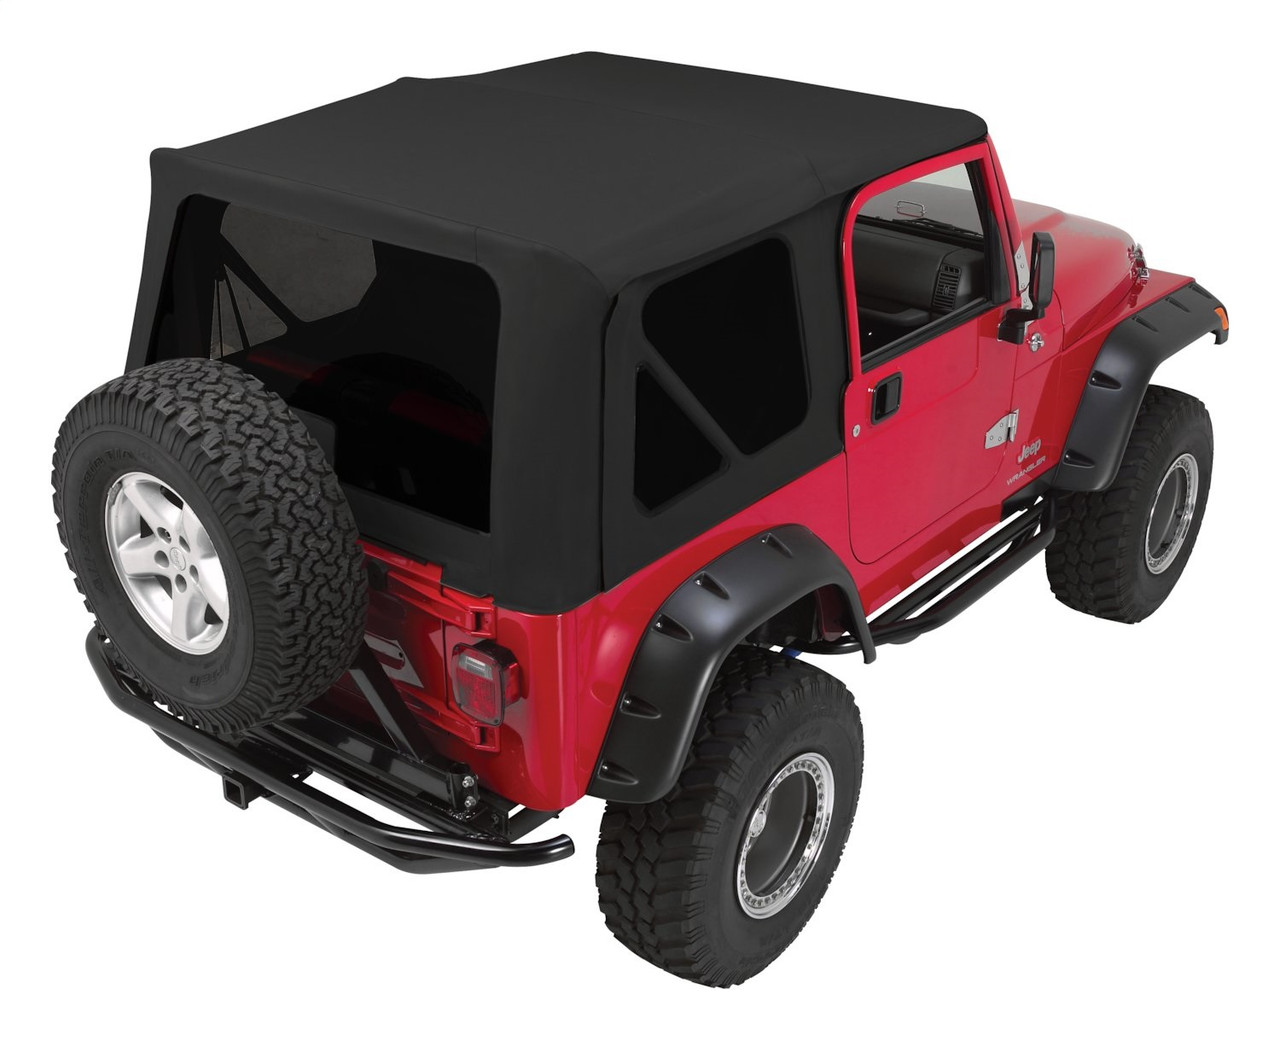 Buy Complete Black Diamond Soft Top w/ Tinted Wind. for Jeep 76-95 CJ-7, YJ  Wrangler CT20035T-RT Rough Trail at JeepHut Off-Road